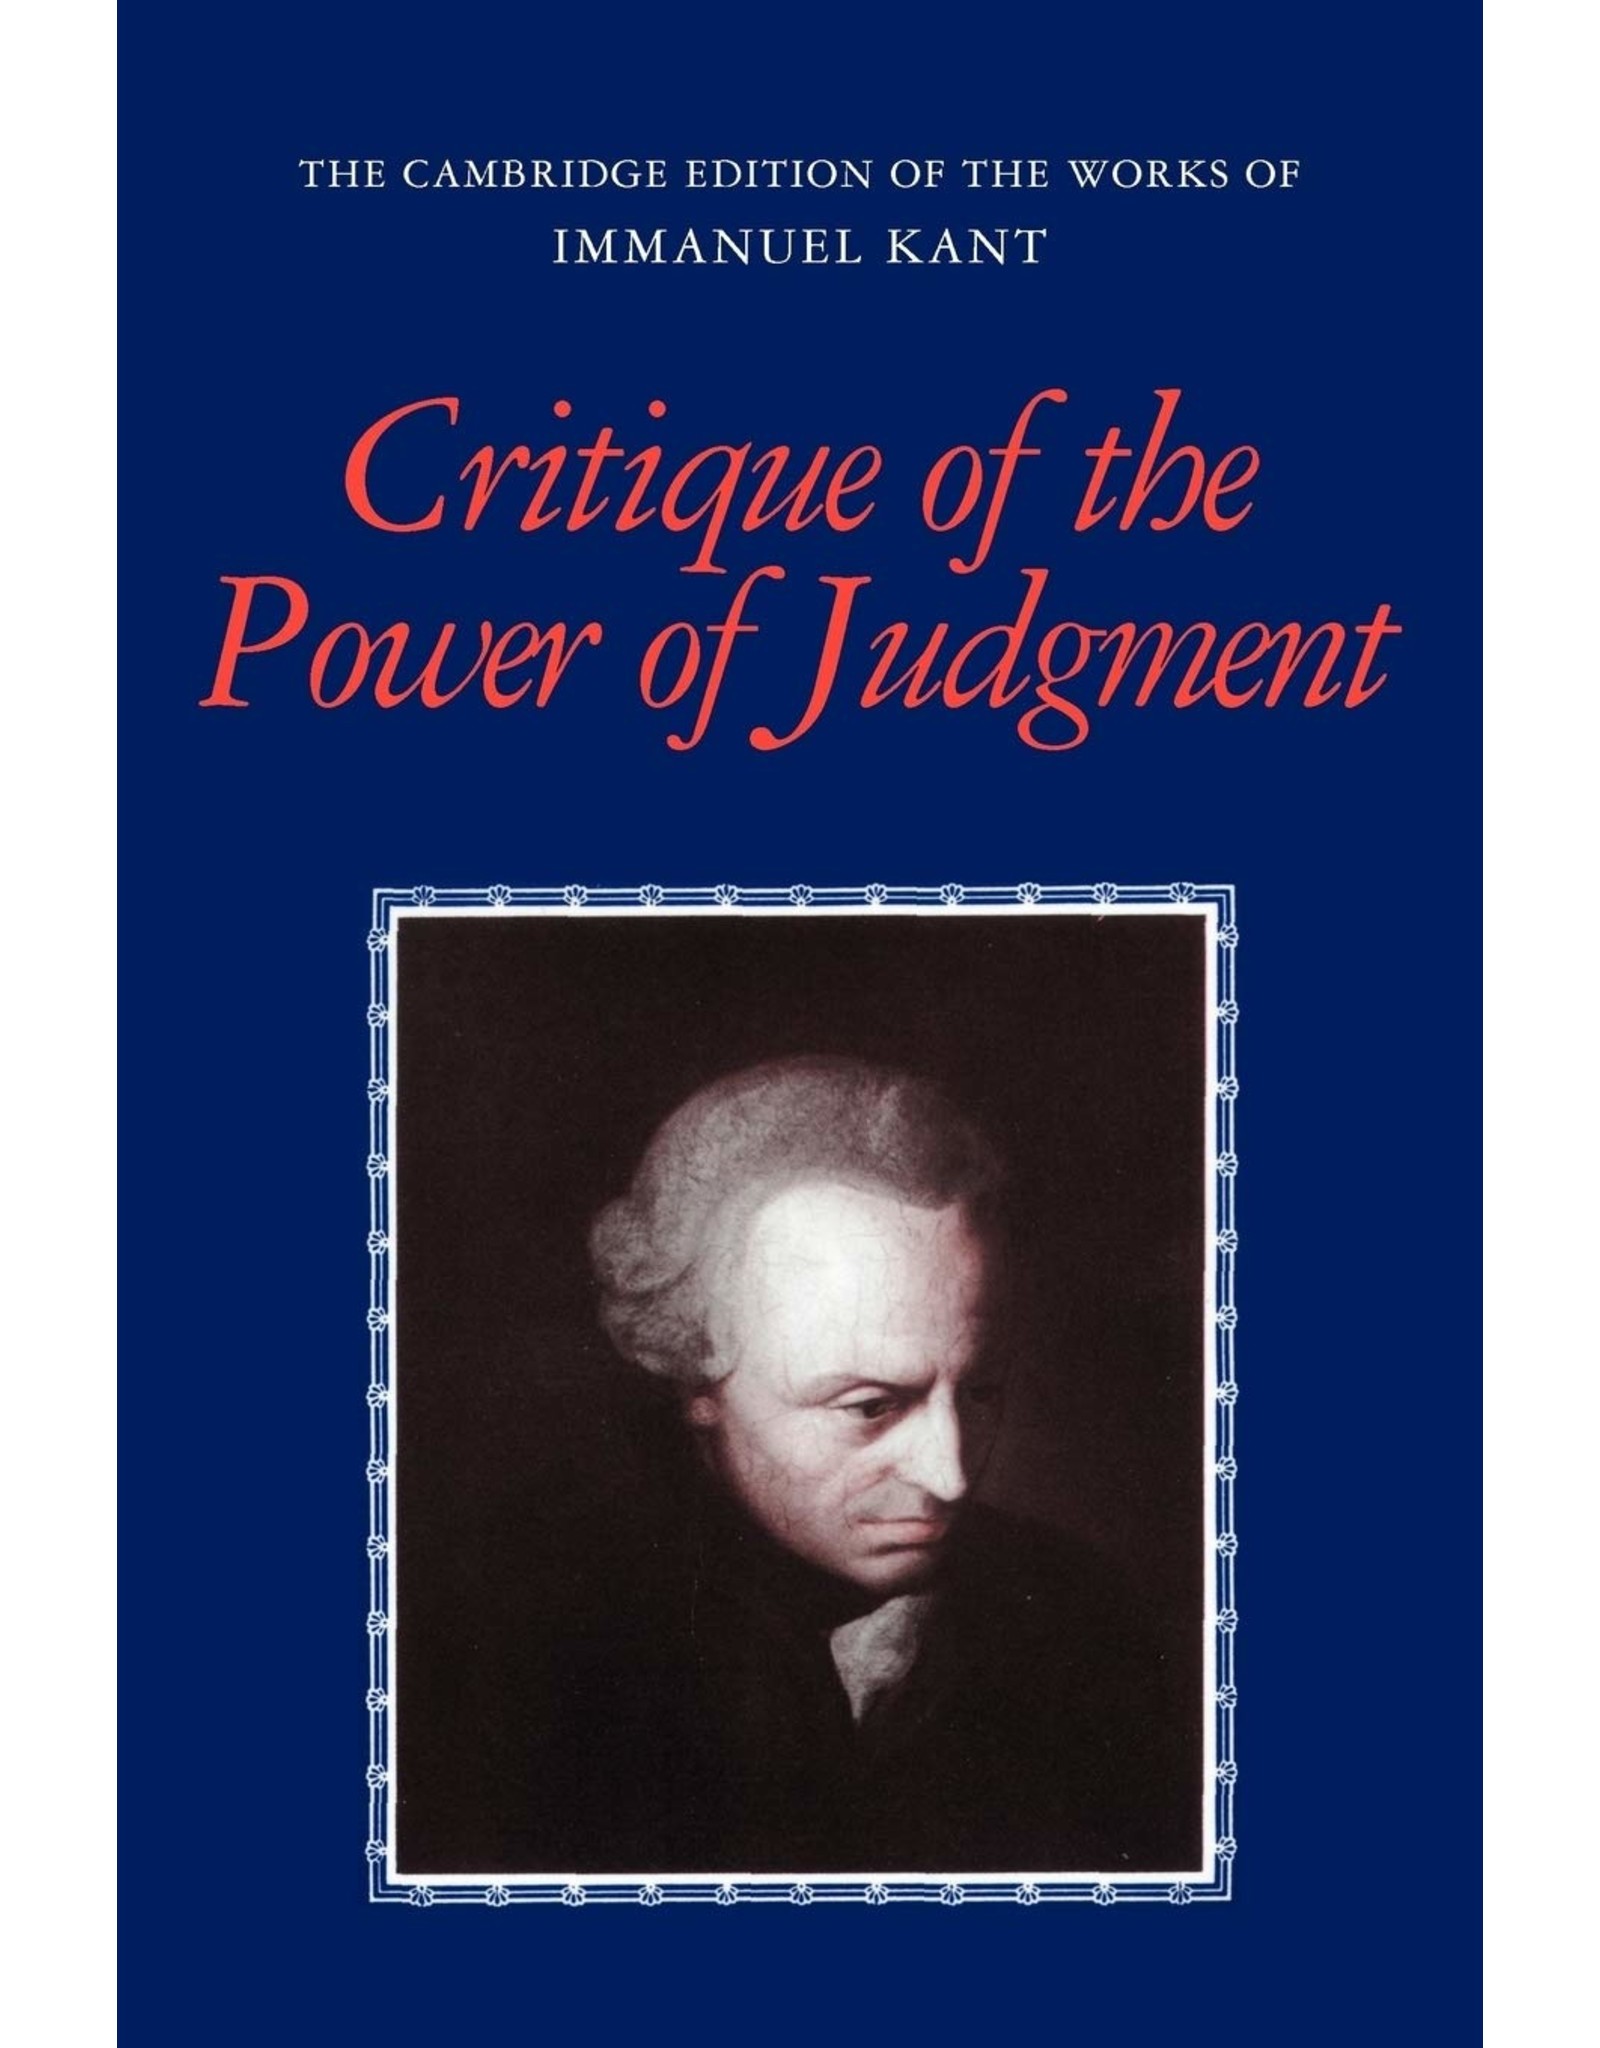 Textbook Critique of the Power of Judgment